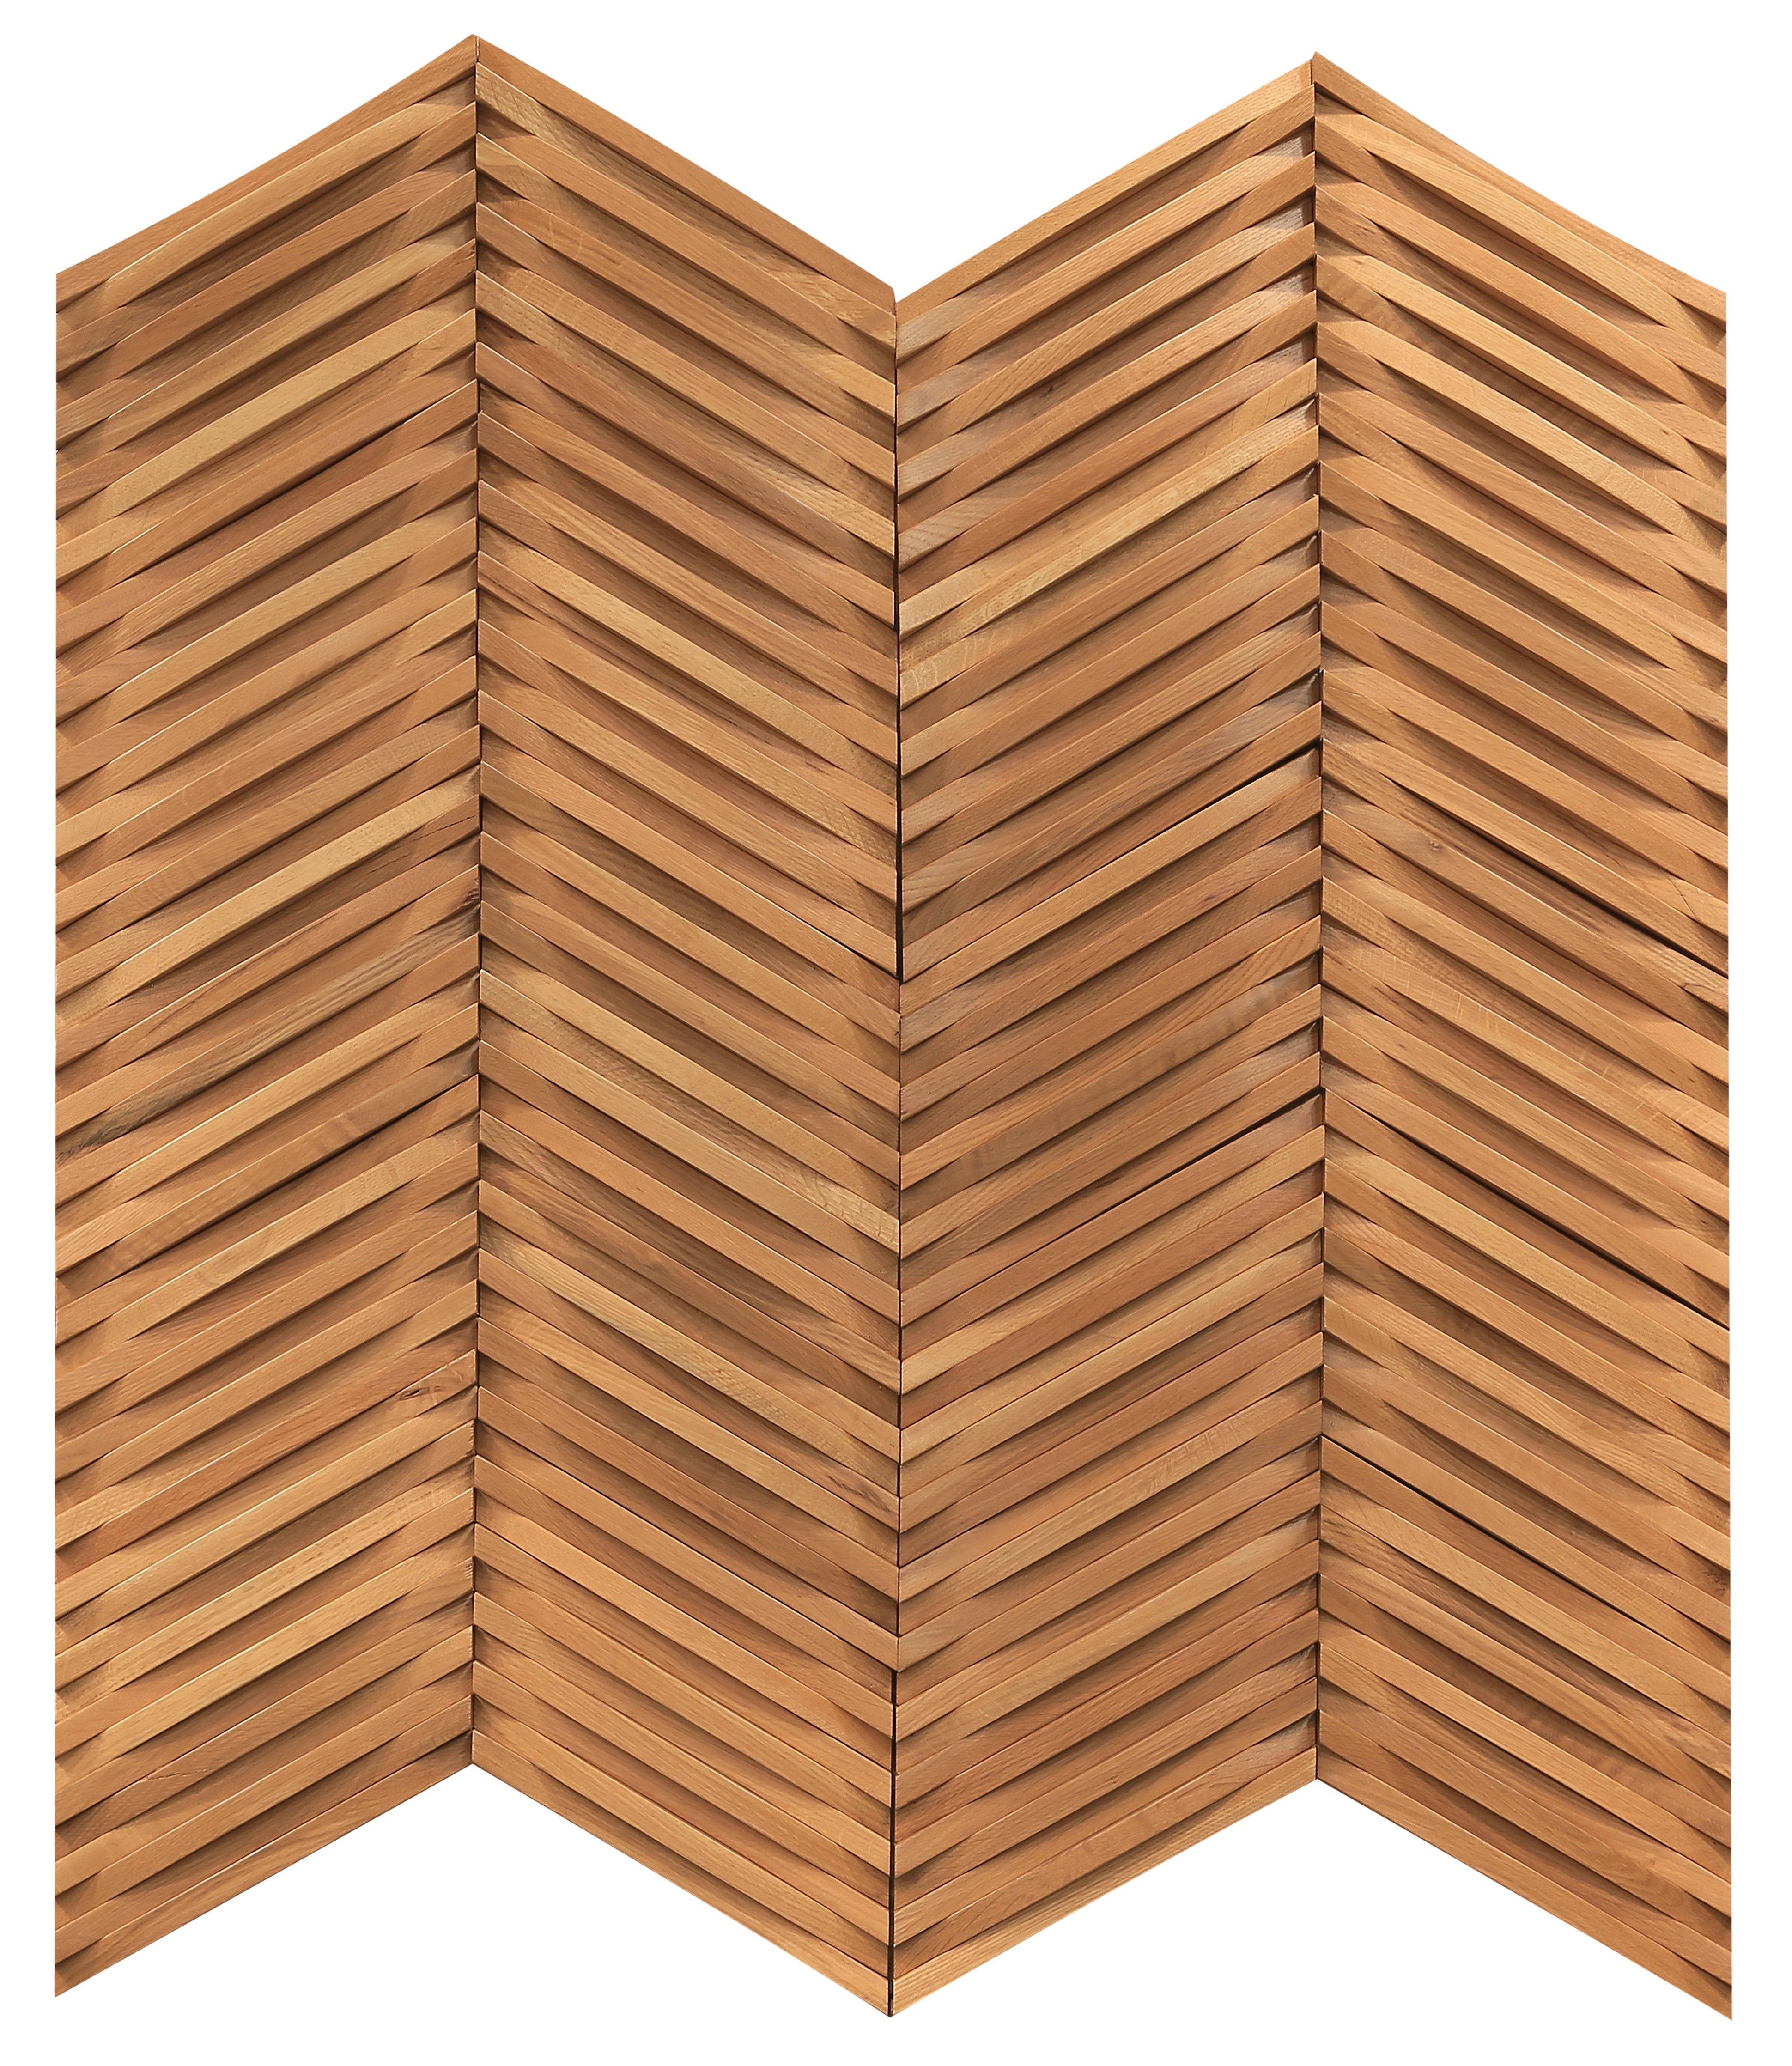 duchateau inceptiv curva chevron golden oak oak three dimensional wall natural wood panel conversion varnish for interior use distributed by surface group international